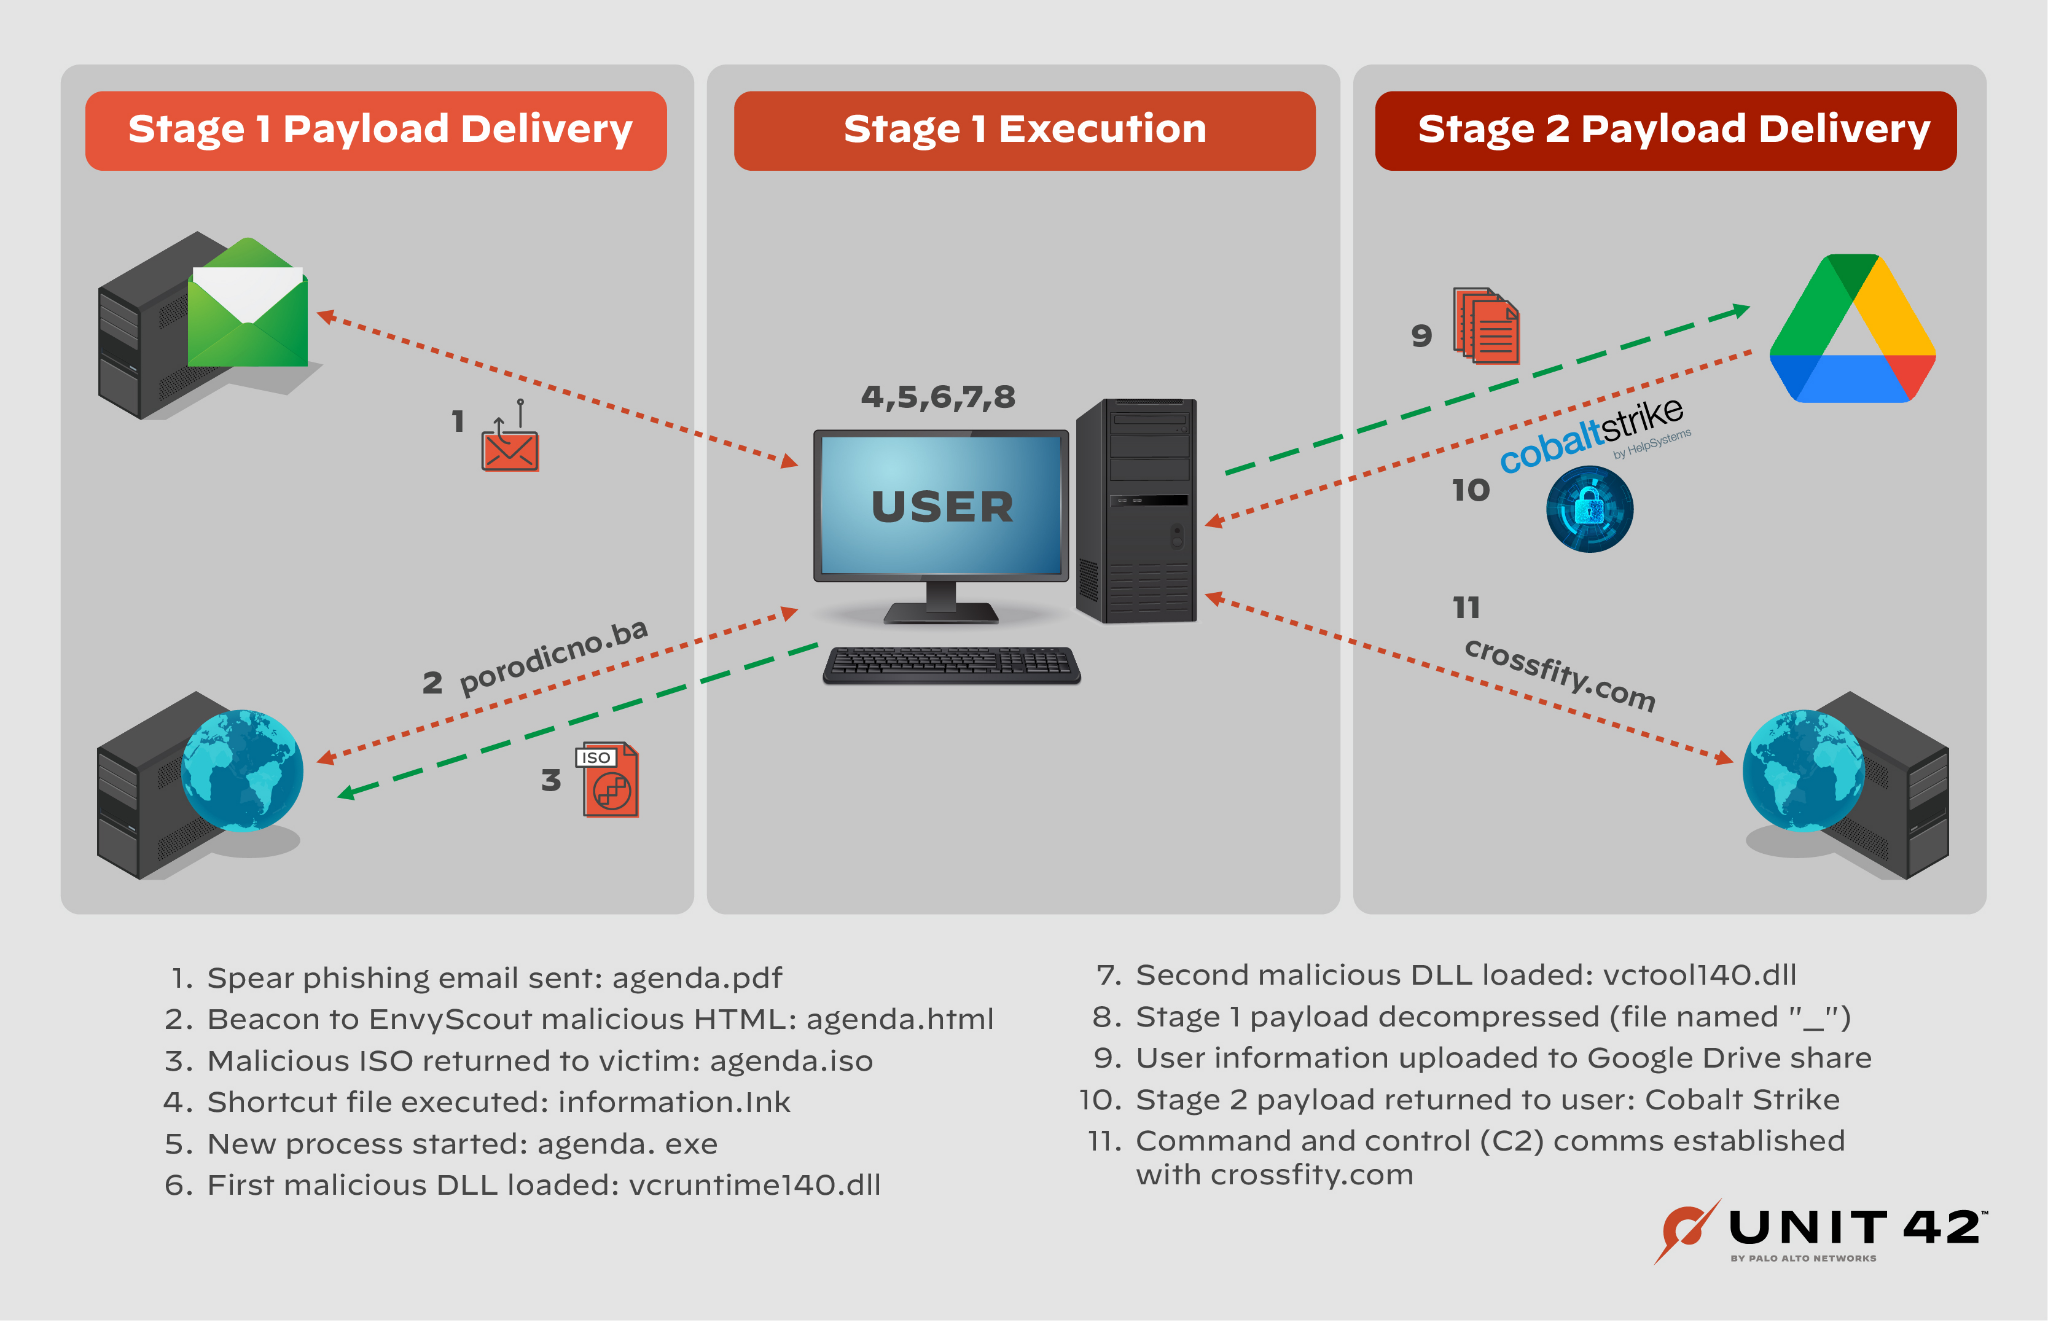 The infographic traces stage 1 payload delivery, stage 1 execution and stage 2 payload delivery. Steps: 1. Spear phishing email sent: agenda.pdf, 2. Beacon to EnvyScout malicious HTML: agenda.html, 3. Malicious ISO returned to victim: agenda.iso, 4. Shortcut file executed: information.lnk, 5. New process started: agenda.exe, 6. First malicious DLL loaded: vcuruntime140.dll, 7. Second malicious DLL loaded: vctool140.dll, 8. Stage 1 payload decompressed (file named "_"), 9. user information uploaded to Google Drive share, 10. Stage 2 payload returned to user: Cobalt Strike, 11. Command and control (C2) comms established with crossfity[.]com